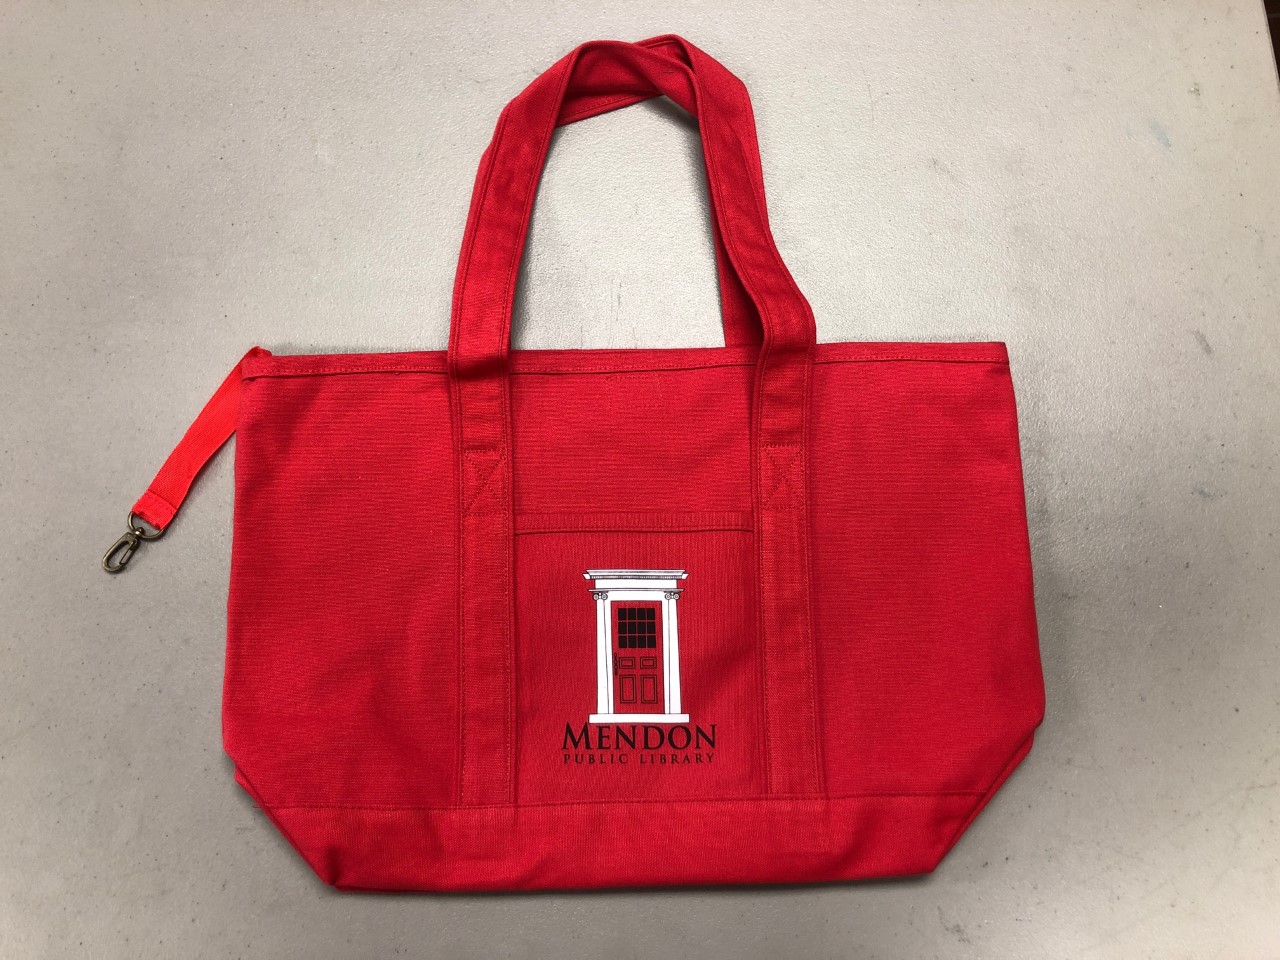 Friends Offer New & Larger Red Tote Bags for Sale